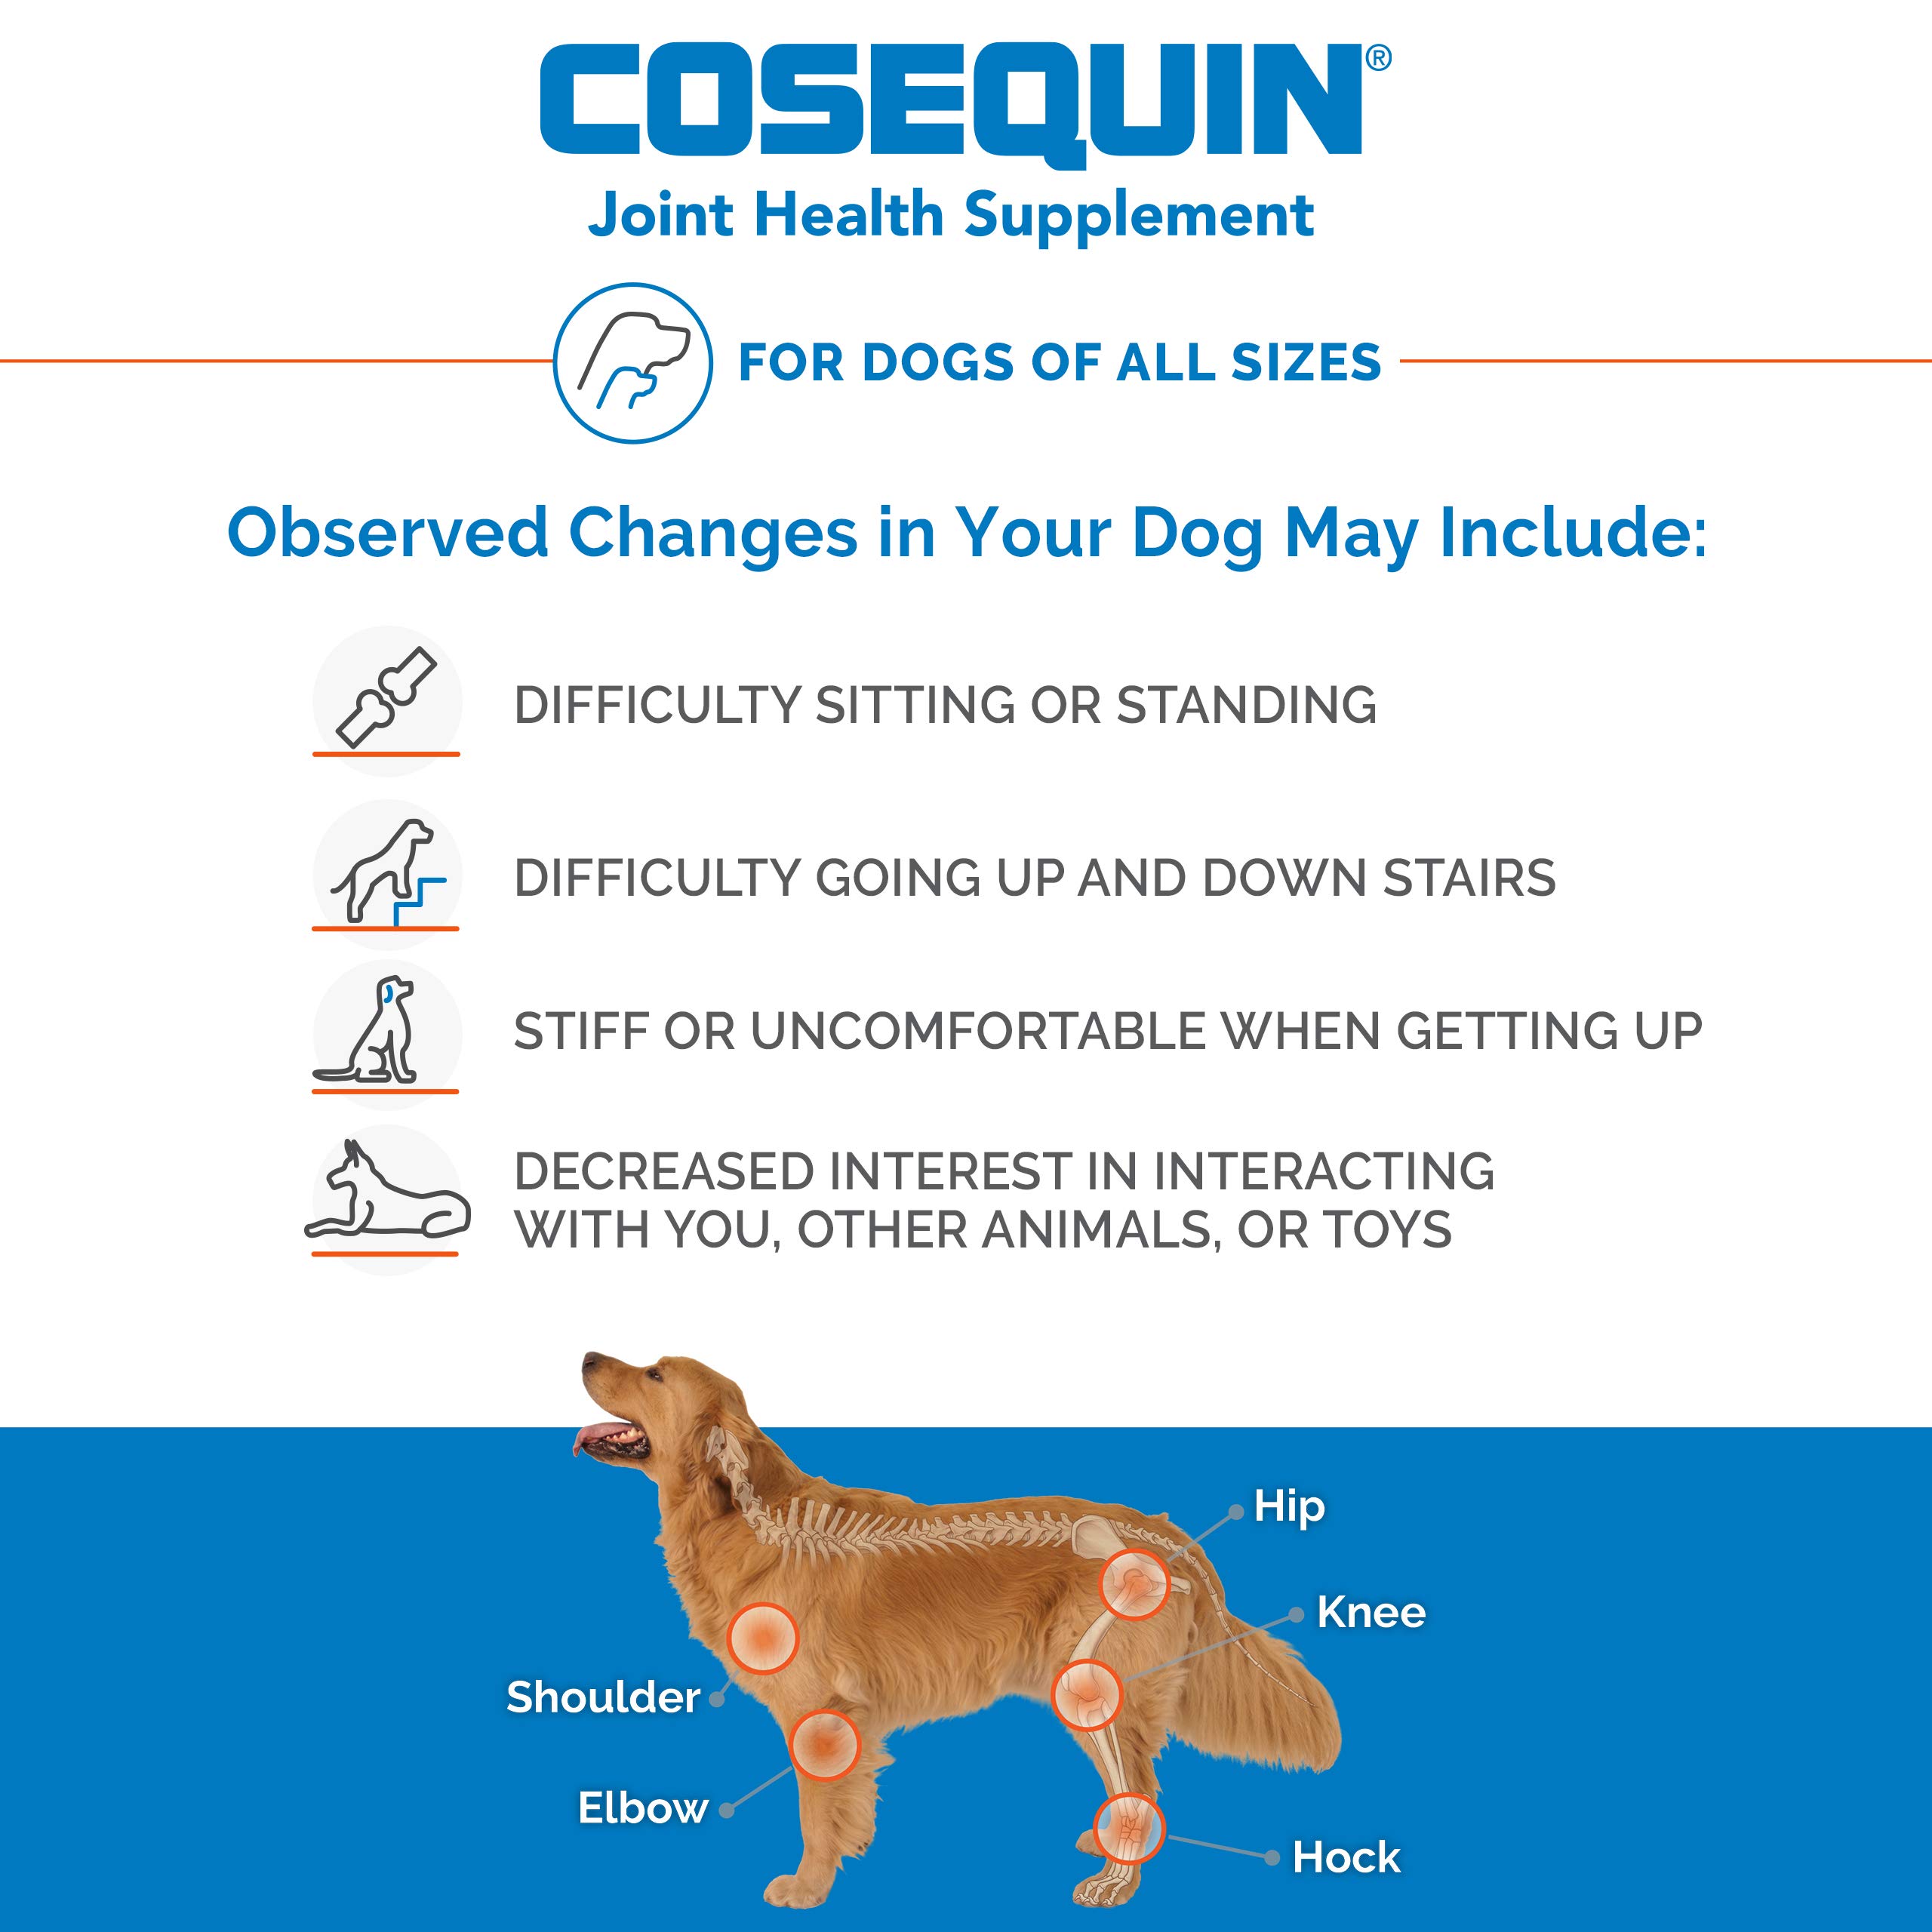 Nutramax Cosequin Maximum Strength Joint Health Supplement for Dogs - With Glucosamine, Chondroitin, MSM, and Hyaluronic Acid, 75 Chewable Tablets (Pack of 1)